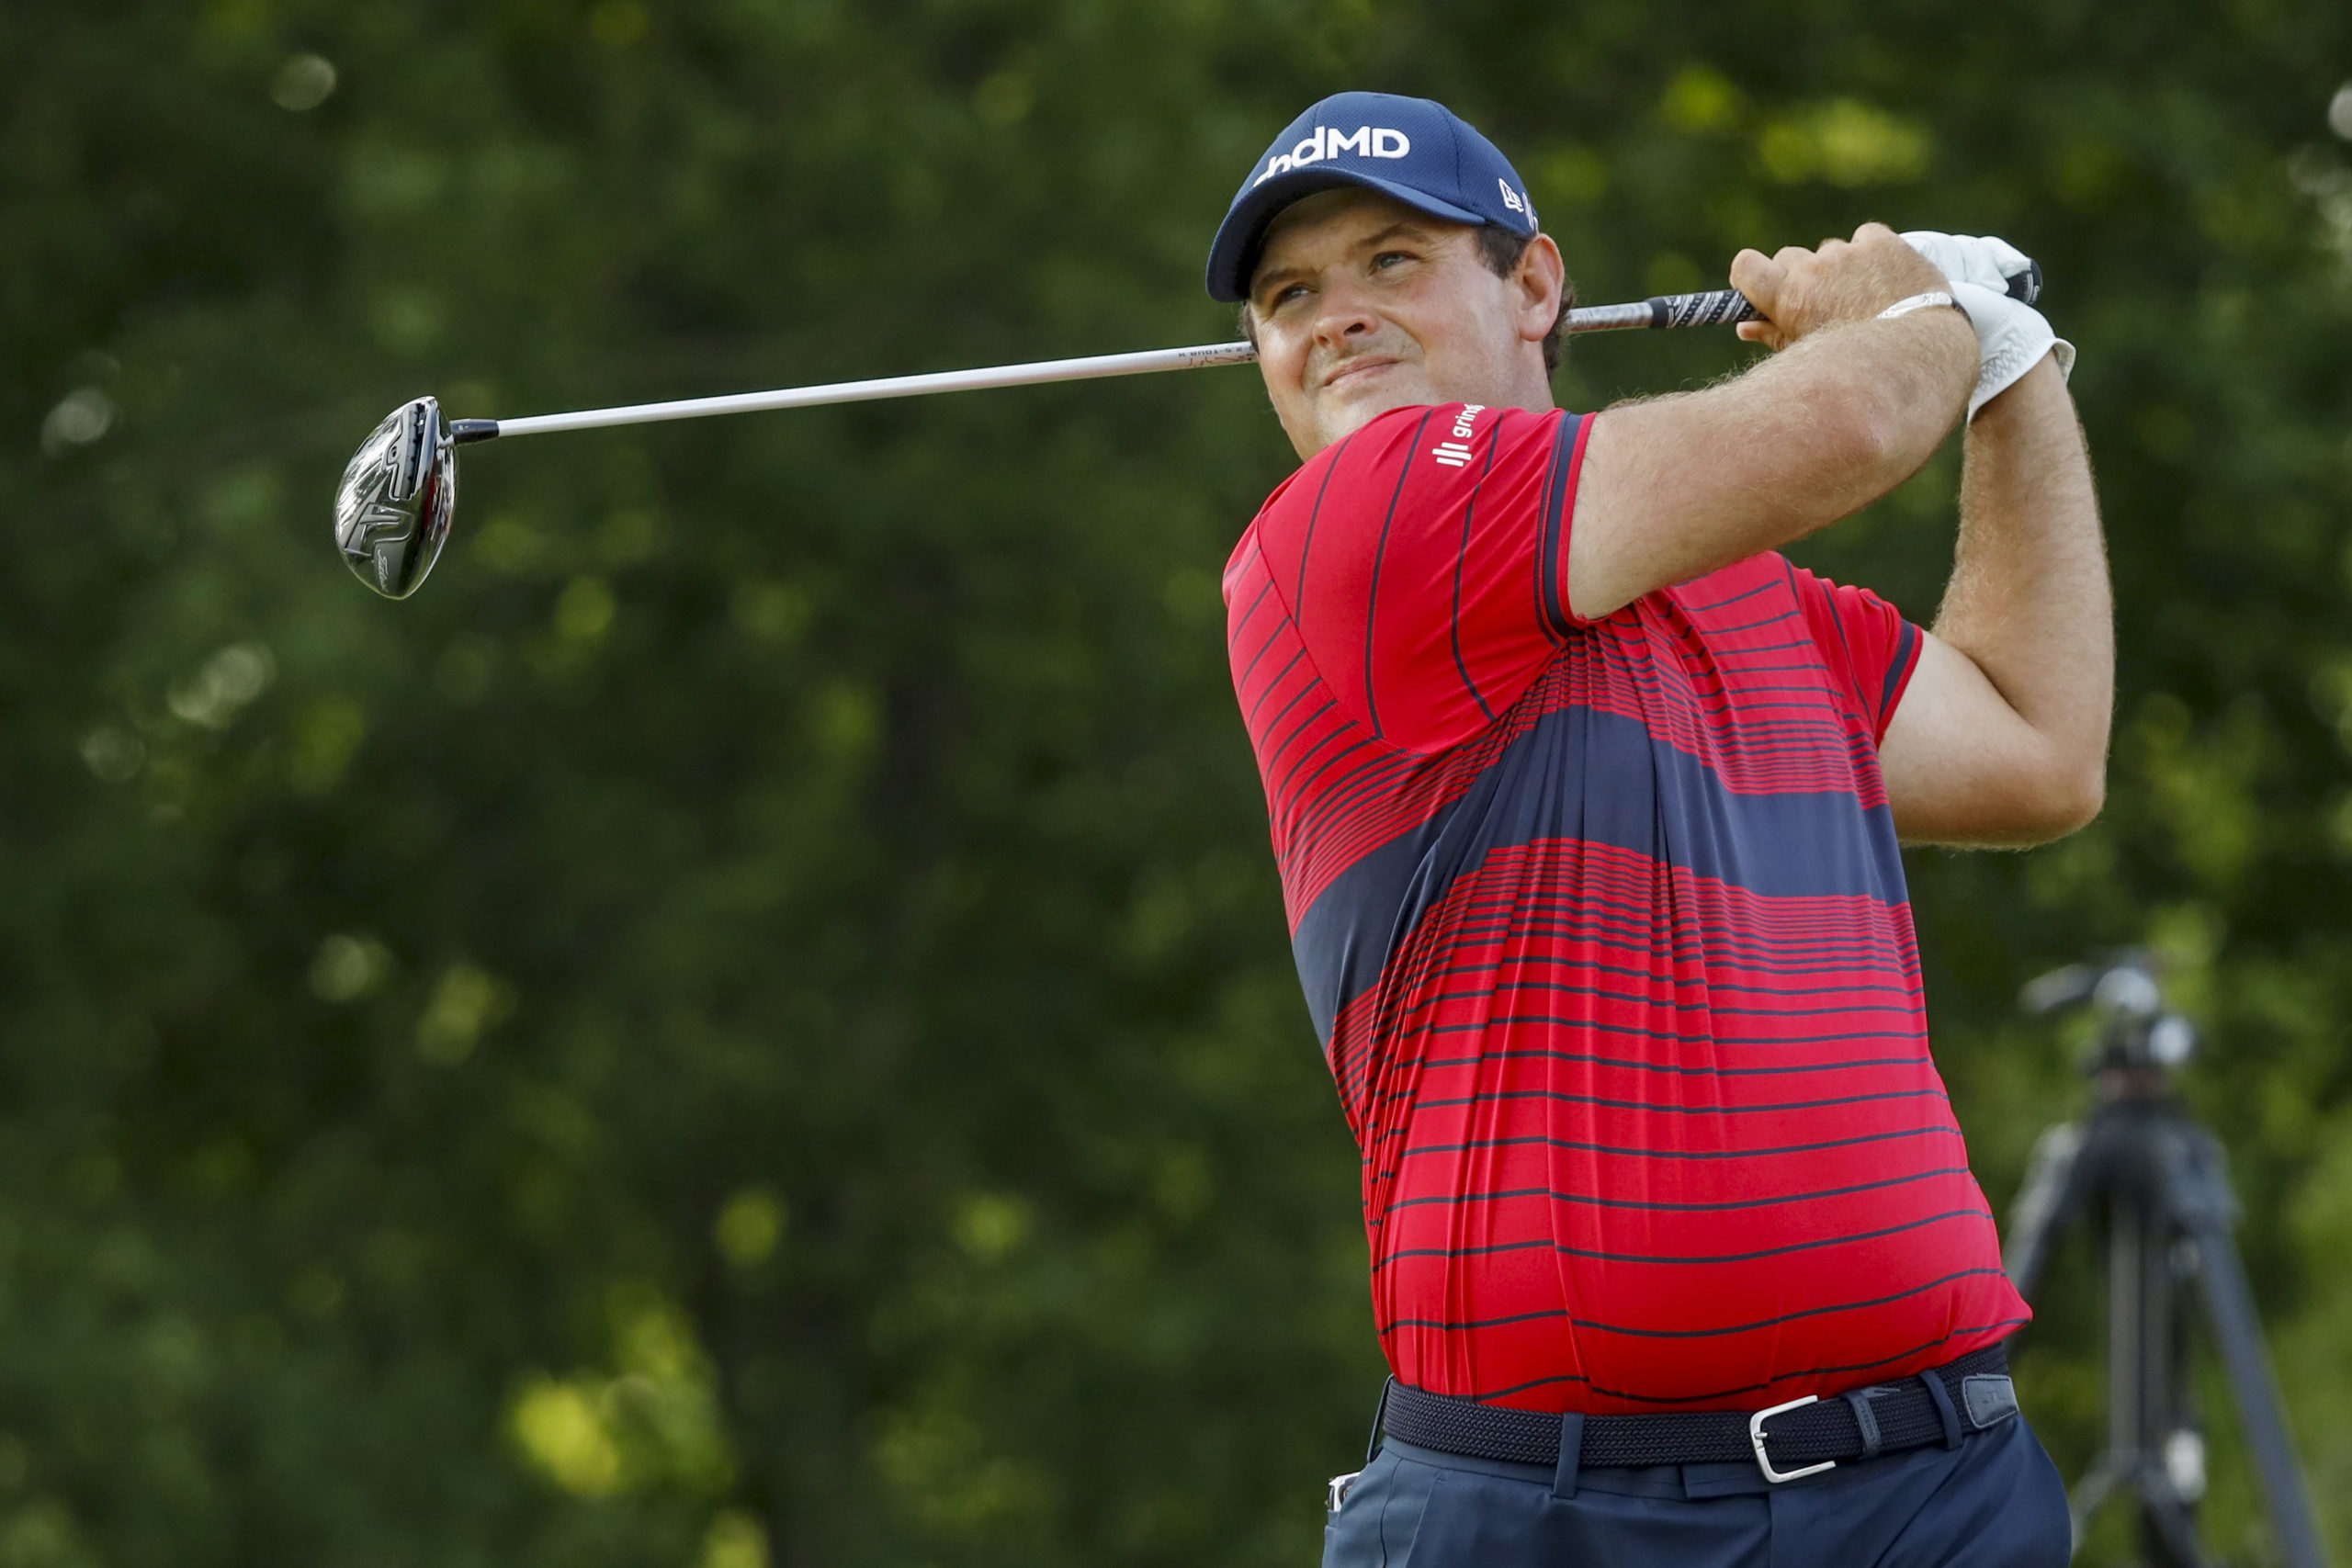 FILE PHOTO: Jul 22, 2021; Blaine, Minnesota, USA; Patrick Reed drives from the 11th tee during the first round of the 3M Open golf tournament. Mandatory Credit: Bruce Kluckhohn-USA TODAY Sports